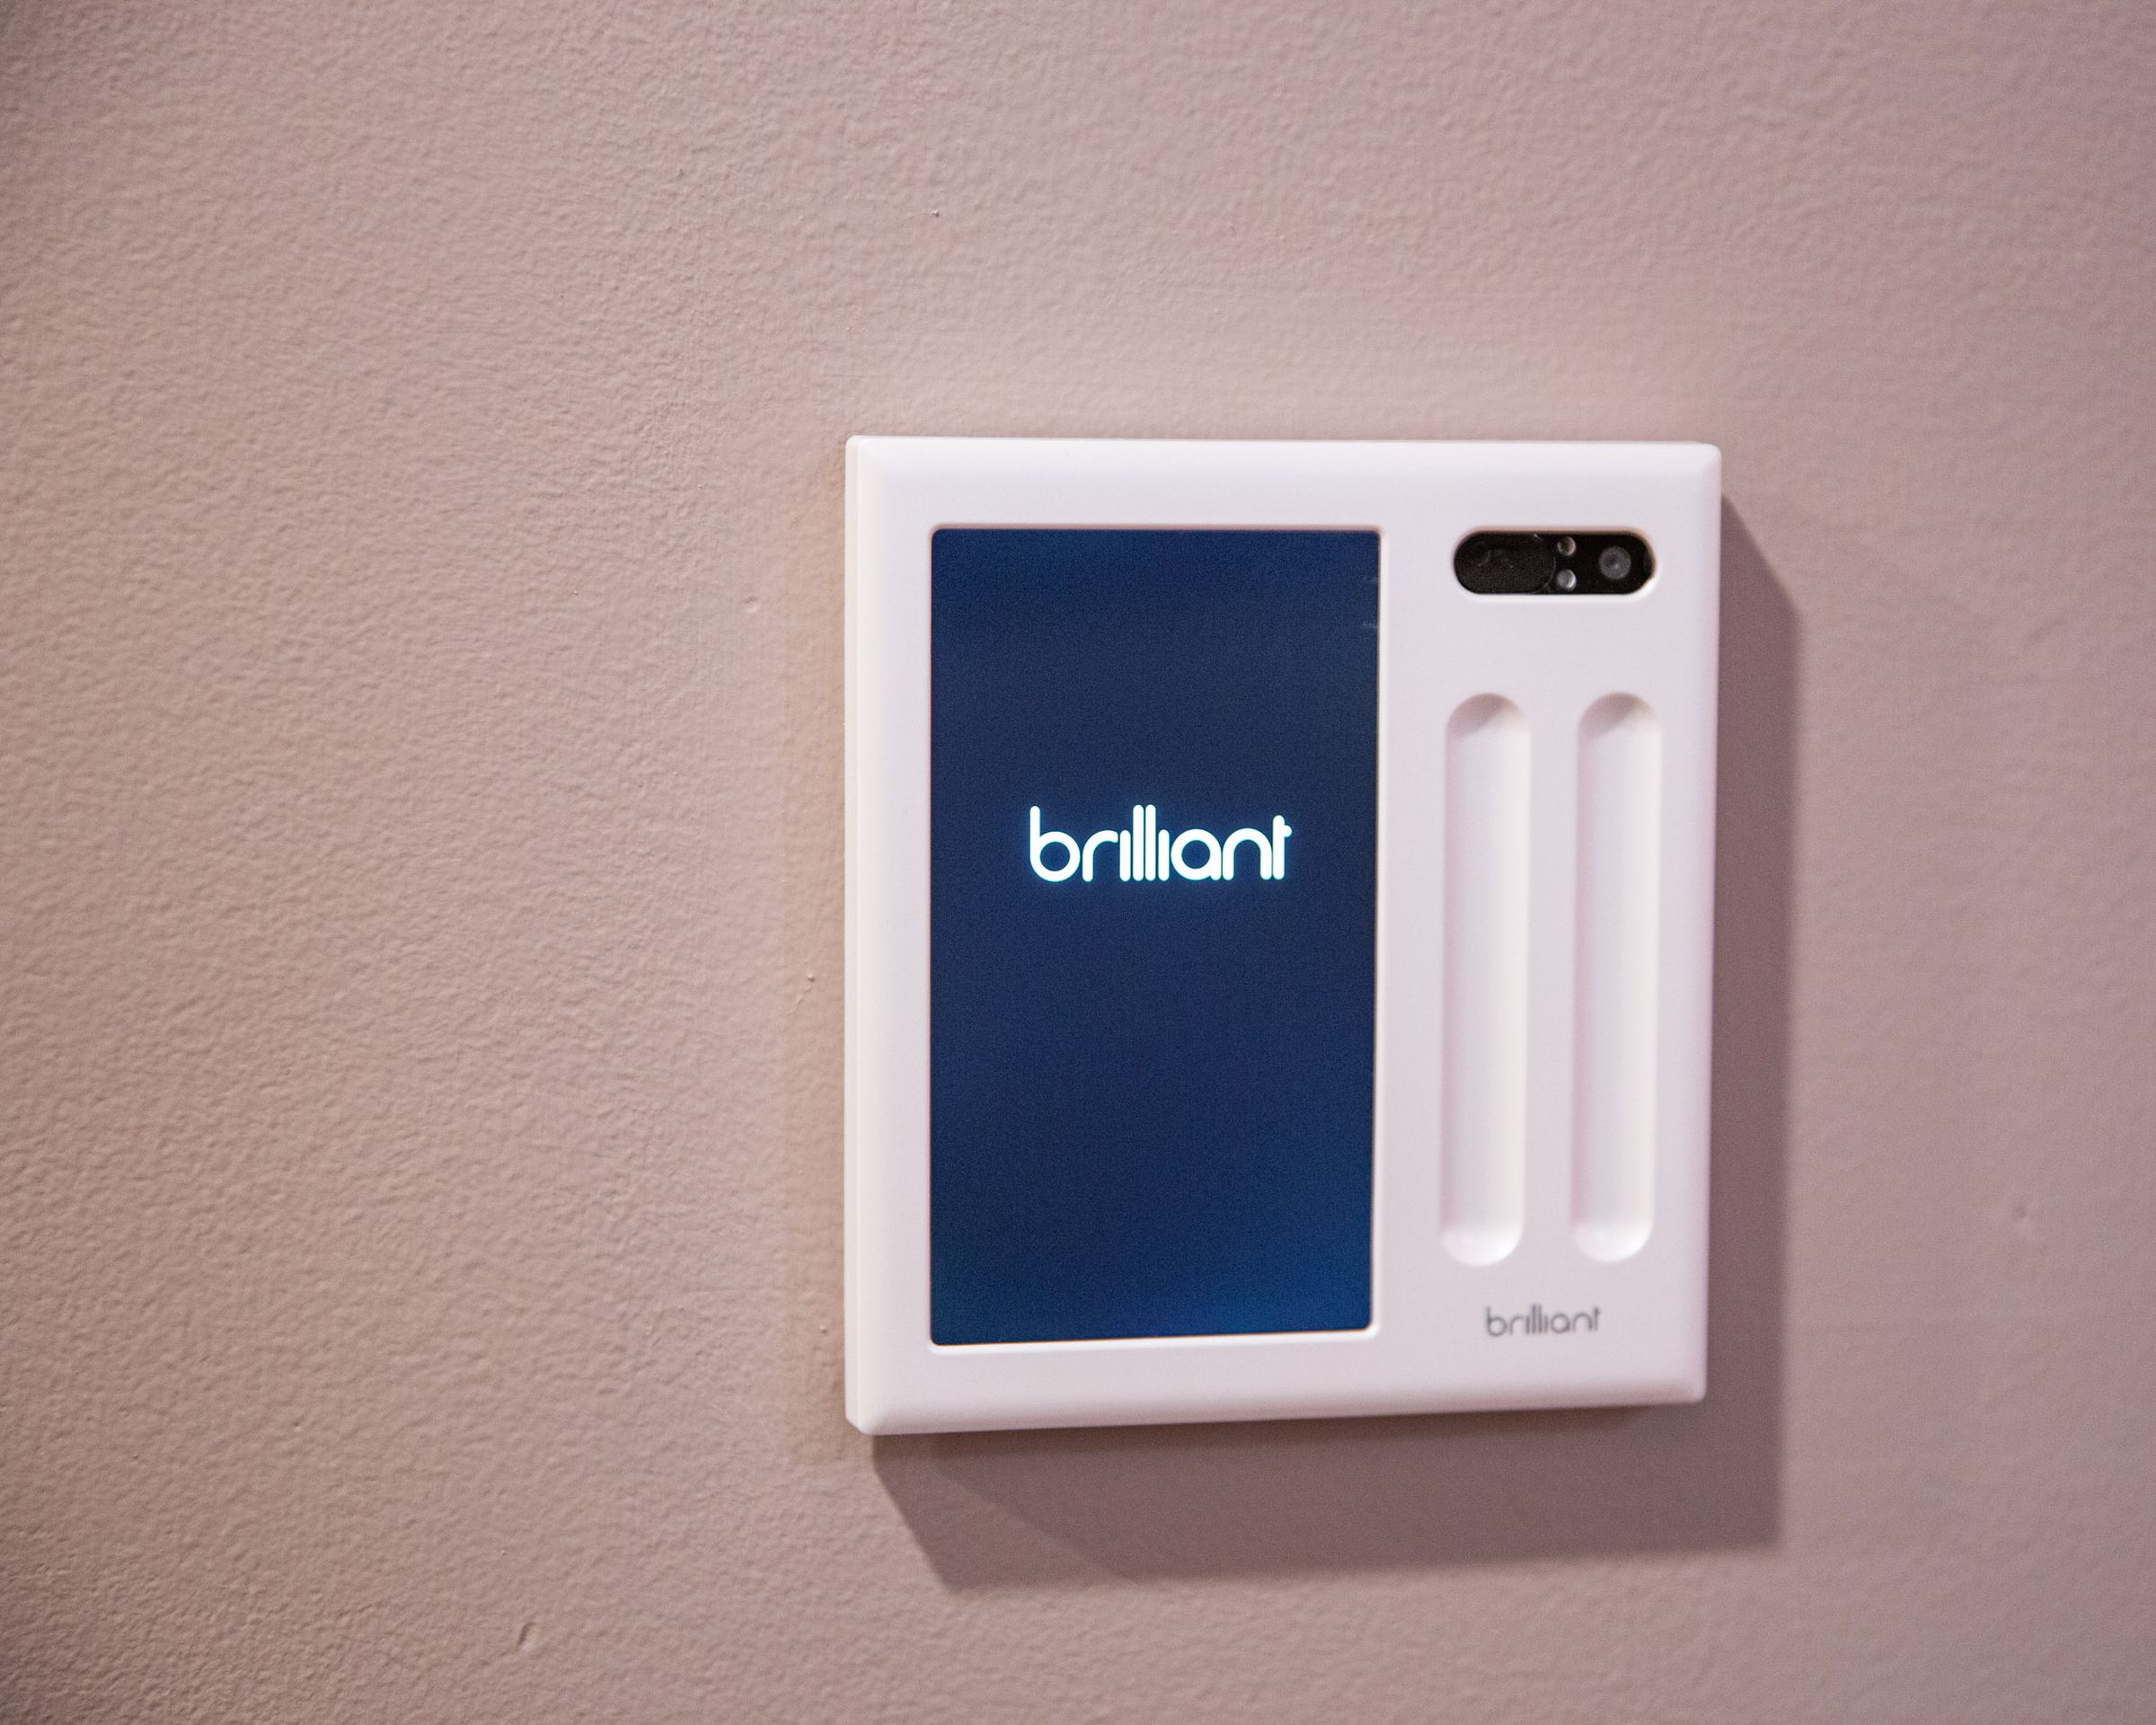 A touchscreen smart home panel on a wall with the word Brilliant dispalyed.